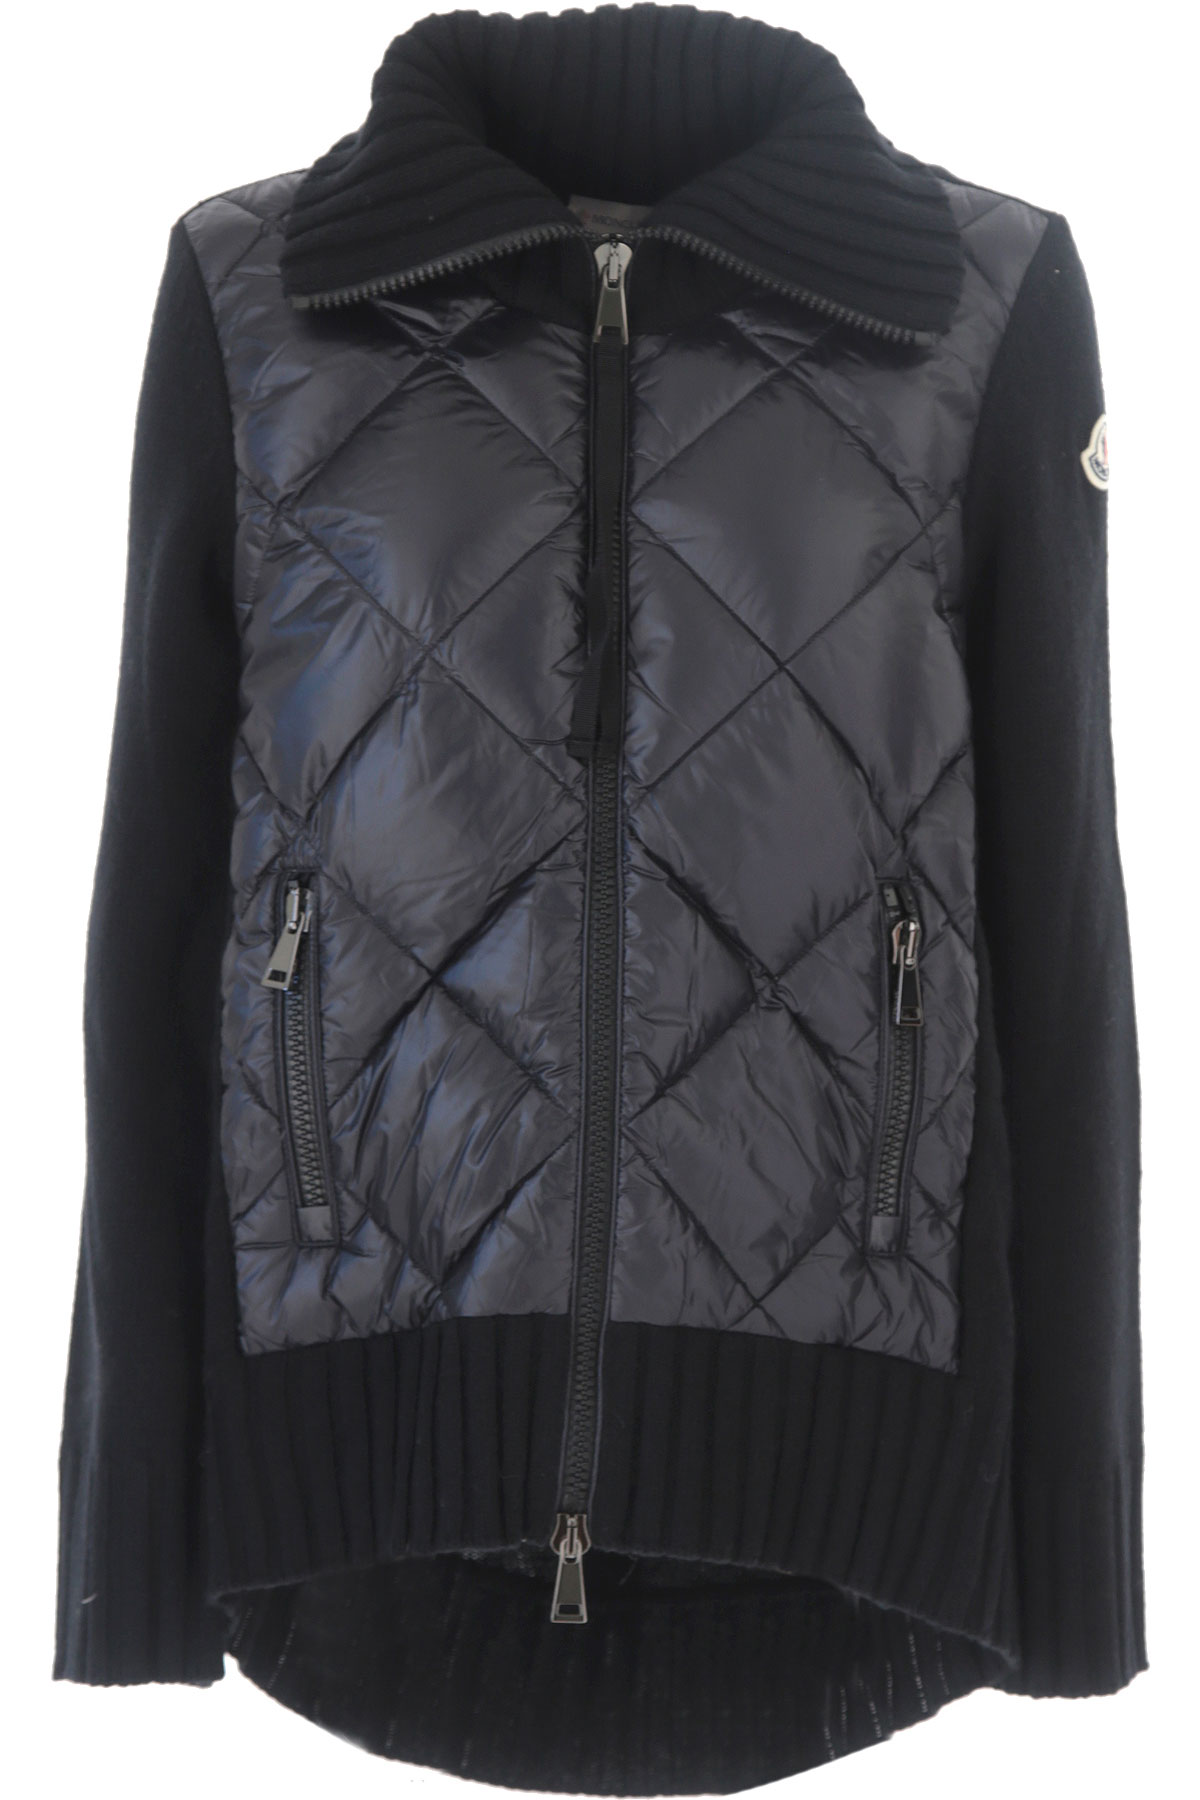 Womens Clothing Moncler, Style code: 9b51600-a9197-999